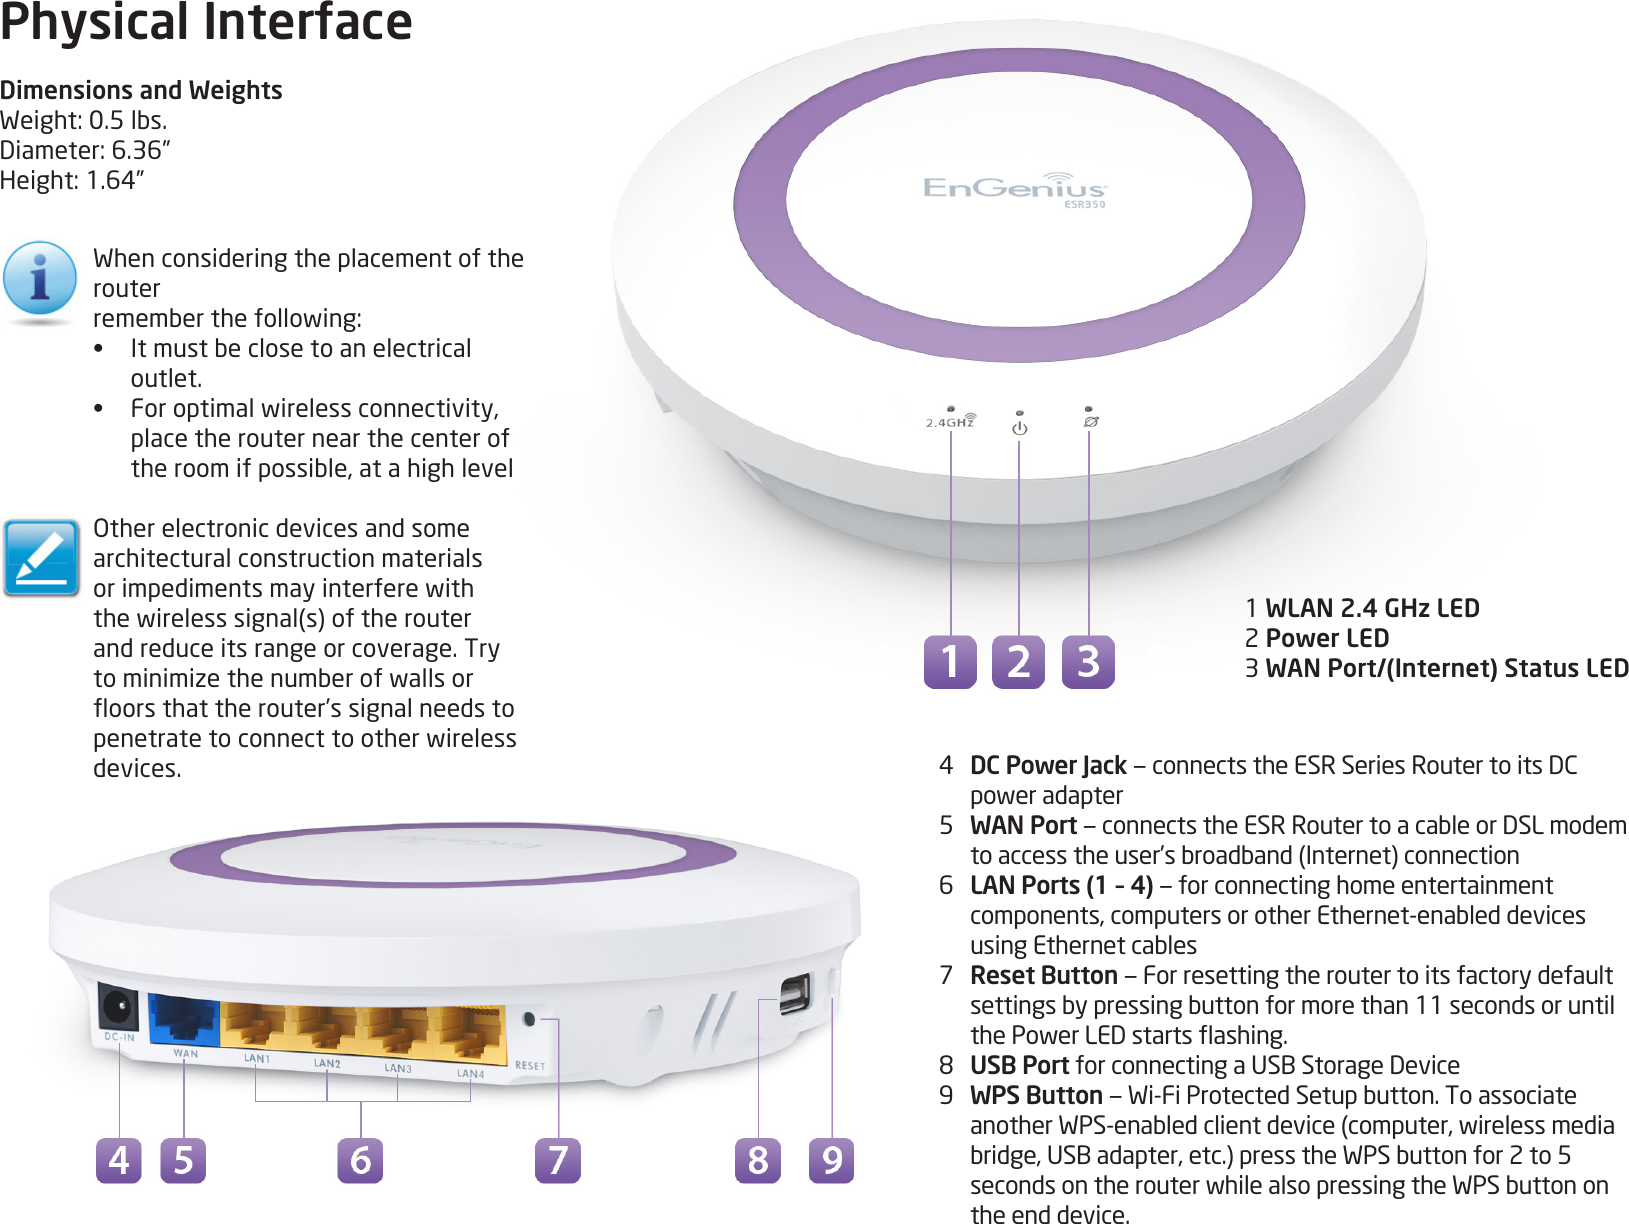 9Physical InterfaceDimensions and WeightsWeight:0.5lbs.Diameter:6.36”Height:1.64”1 WLAN 2.4 GHz LED2 Power LED3 WAN Port/(Internet) Status LED4 DC Power Jack—connectstheESRSeriesRoutertoitsDCpoweradapter5   WAN Port—connectstheESRRoutertoacableorDSLmodemtoaccesstheuser’sbroadband(Internet)connection6   LAN Ports (1 – 4) — for connecting home entertainment components,computersorotherEthernet-enableddevicesusingEthernetcables7 Reset Button — For resetting the router to its factory default settingsbypressingbuttonformorethan11secondsoruntilthePowerLEDstartsashing.8 USB PortforconnectingaUSBStorageDevice9  WPS Button—Wi-FiProtectedSetupbutton.ToassociateanotherWPS-enabledclientdevice(computer,wirelessmediabridge,USBadapter,etc.)presstheWPSbuttonfor2to5secondsontherouterwhilealsopressingtheWPSbuttononthe end device.Whenconsideringtheplacementoftherouterrememberthefollowing:• Itmustbeclosetoanelectricaloutlet.• Foroptimalwirelessconnectivity,place the router near the center of theroomifpossible,atahighlevelOtherelectronicdevicesandsomearchitectural construction materials orimpedimentsmayinterferewiththewirelesssignal(s)oftherouterand reduce its range or coverage. Try tominimizethenumberofwallsoroorsthattherouter’ssignalneedstopenetratetoconnecttootherwirelessdevices.